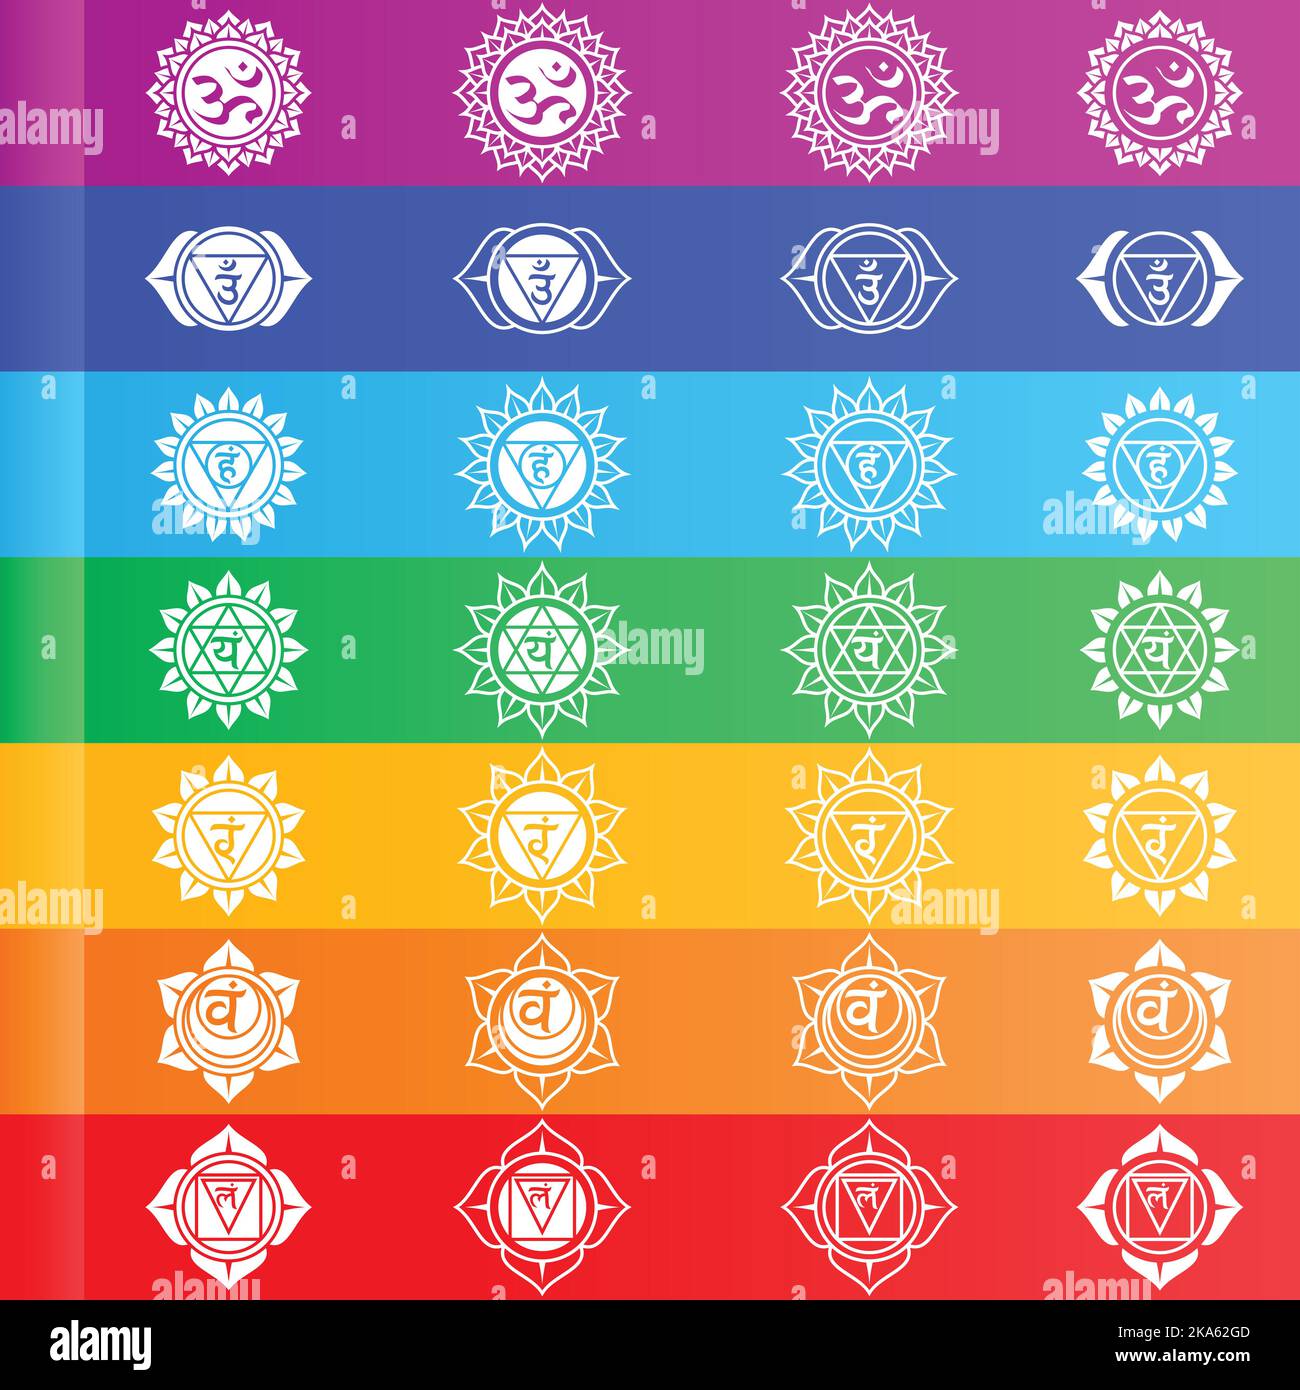 Vector design of the seven chakra energy center, a symbol of Hinduism doctrine that shows the seven chakras of the human body Stock Vector